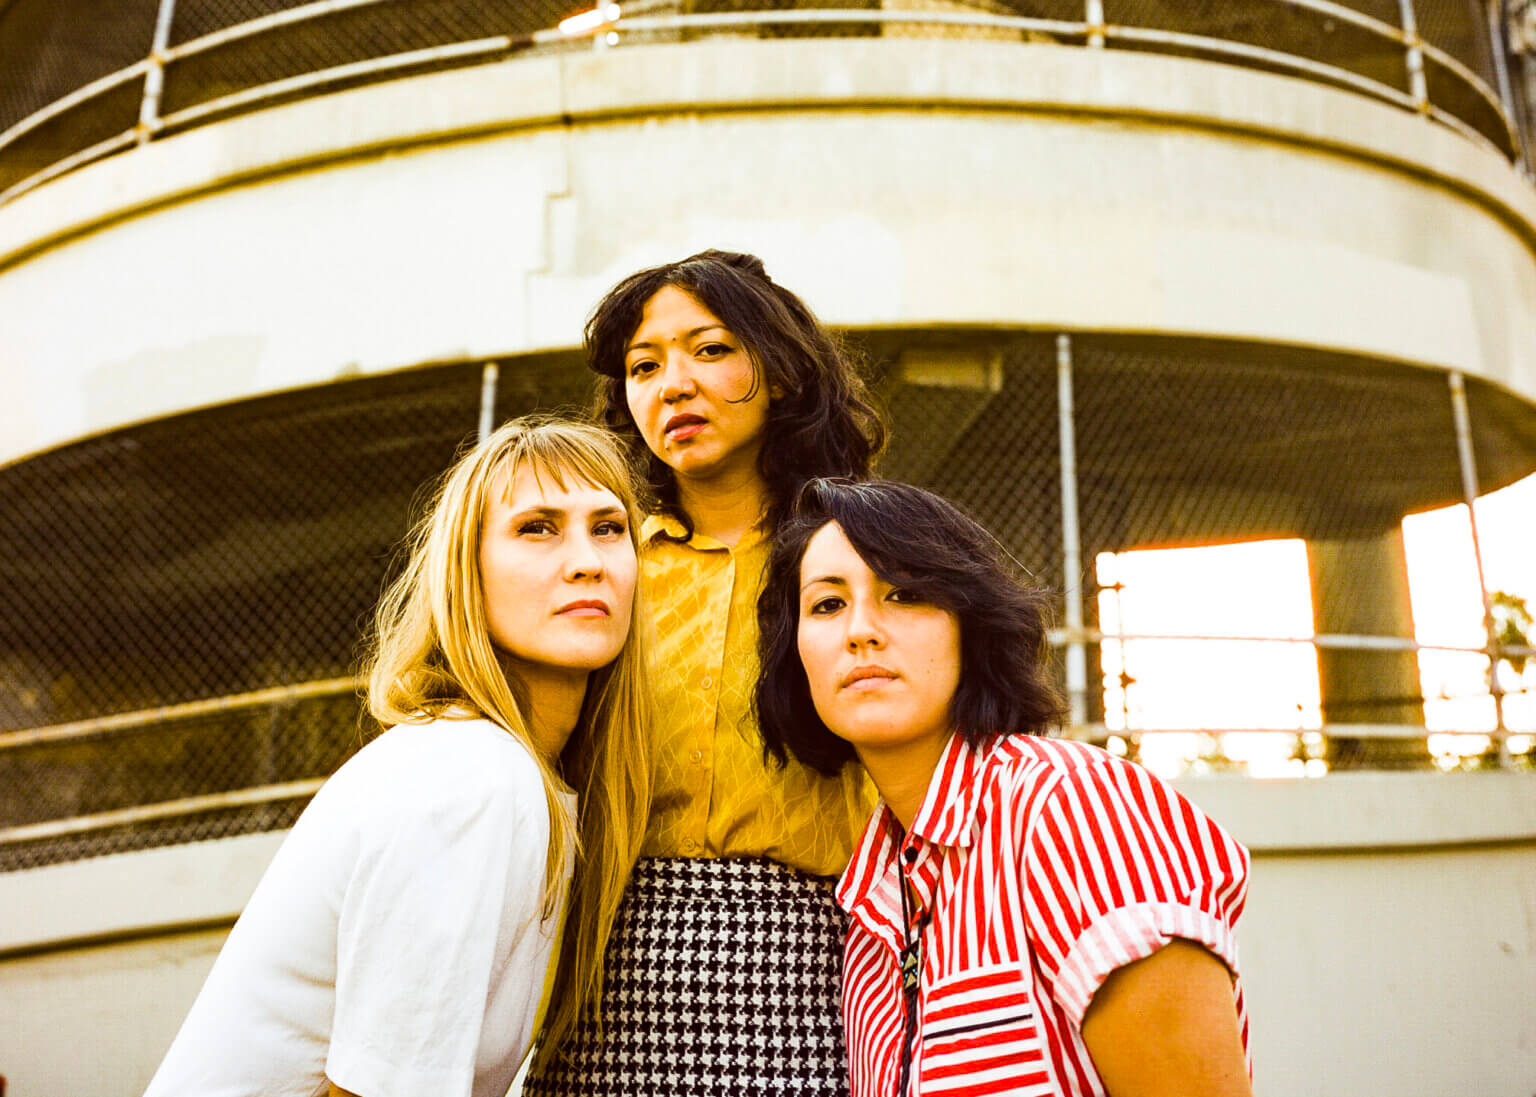 La Luz is sharing its new single “In the Country,” the track is now available to stream via Hardly Art. La Luz play 9/24 at Ohana Fest